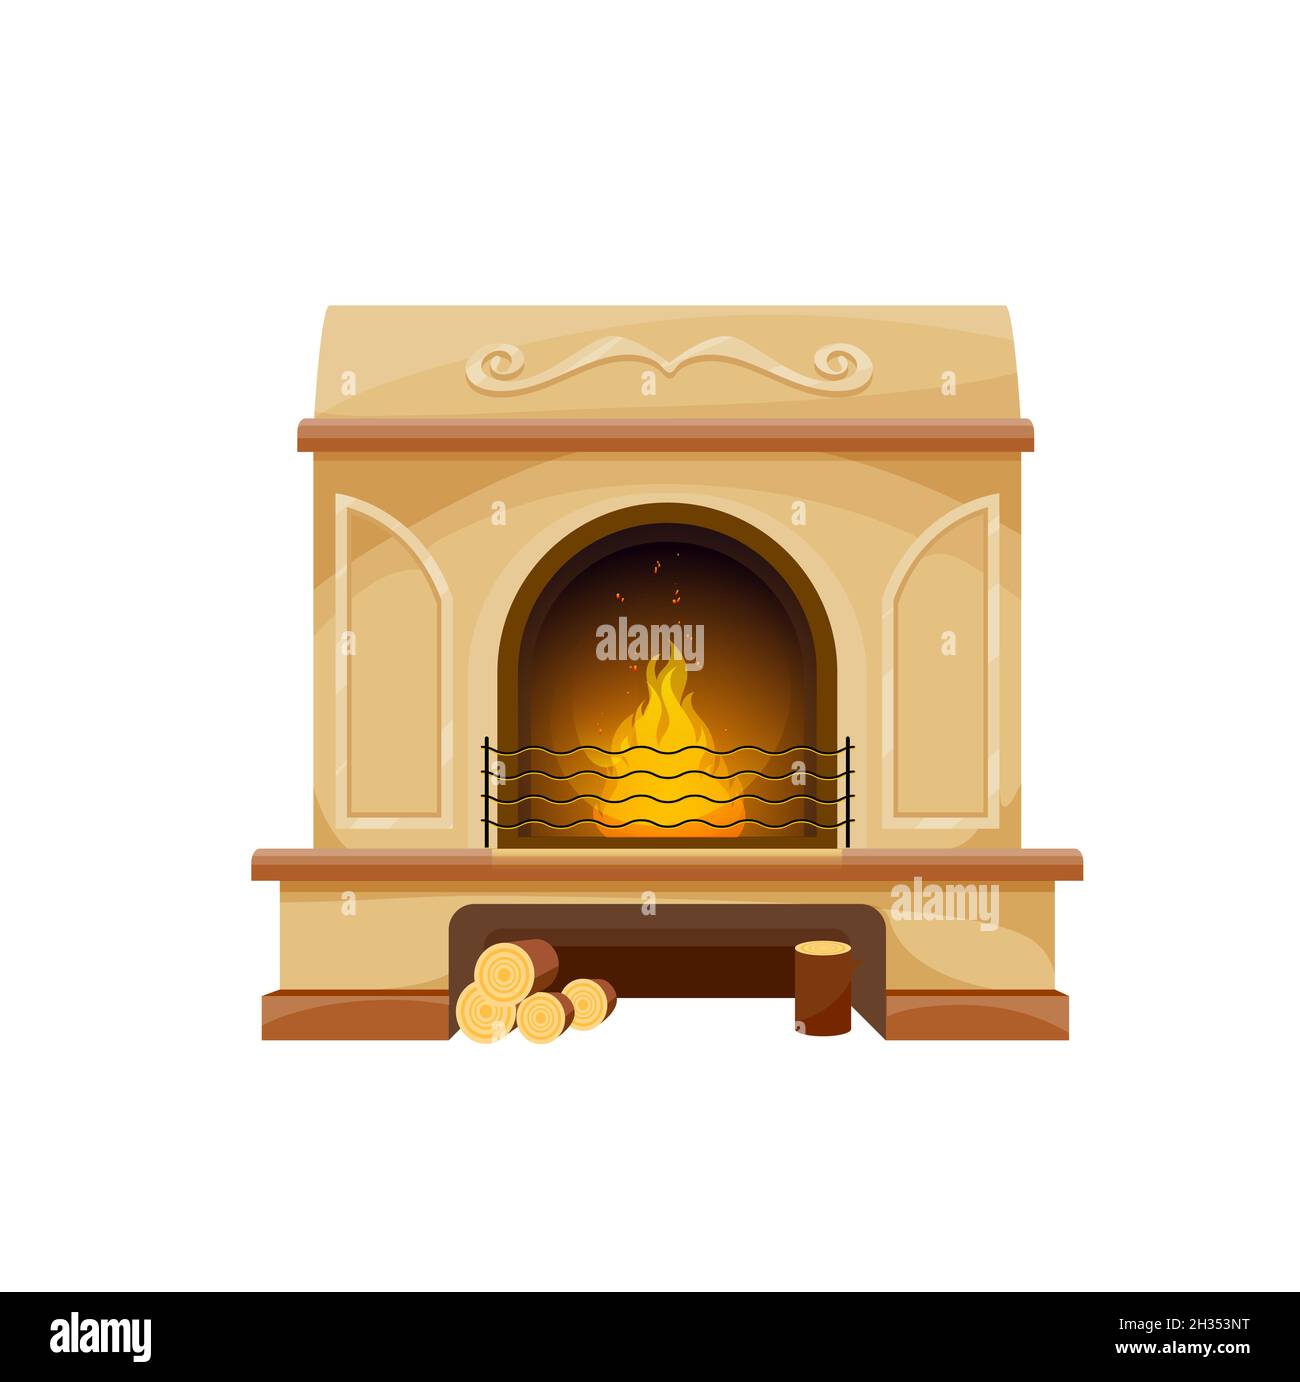 Modern interior fireplace with firewood, vector wood burning oven or hearth with fire flames, steel grate and wood logs, marble facing, frame, mantel. Stock Vector